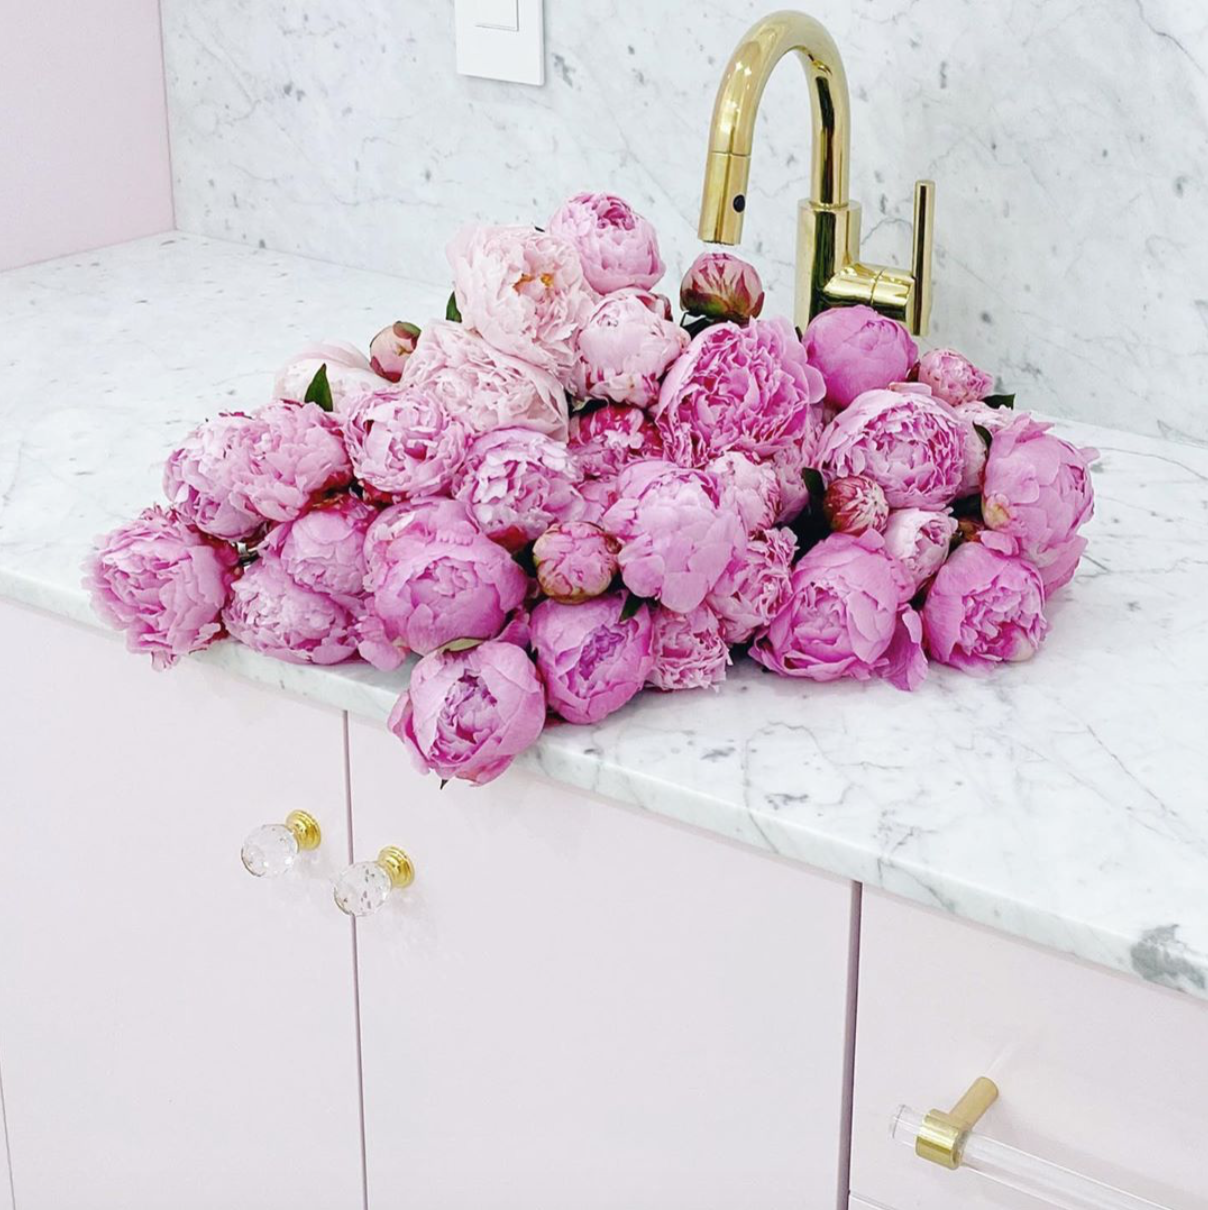 POSH-PR-The-Caroline-Doll-Barbie-Office-Pink-Style-Boss-Goals-At-Home-Workspace-Luxury-Fashion-Infused-Office-The-Doll-HQ-Chic-Agency-Custom-Dream-Kitchen-8.png